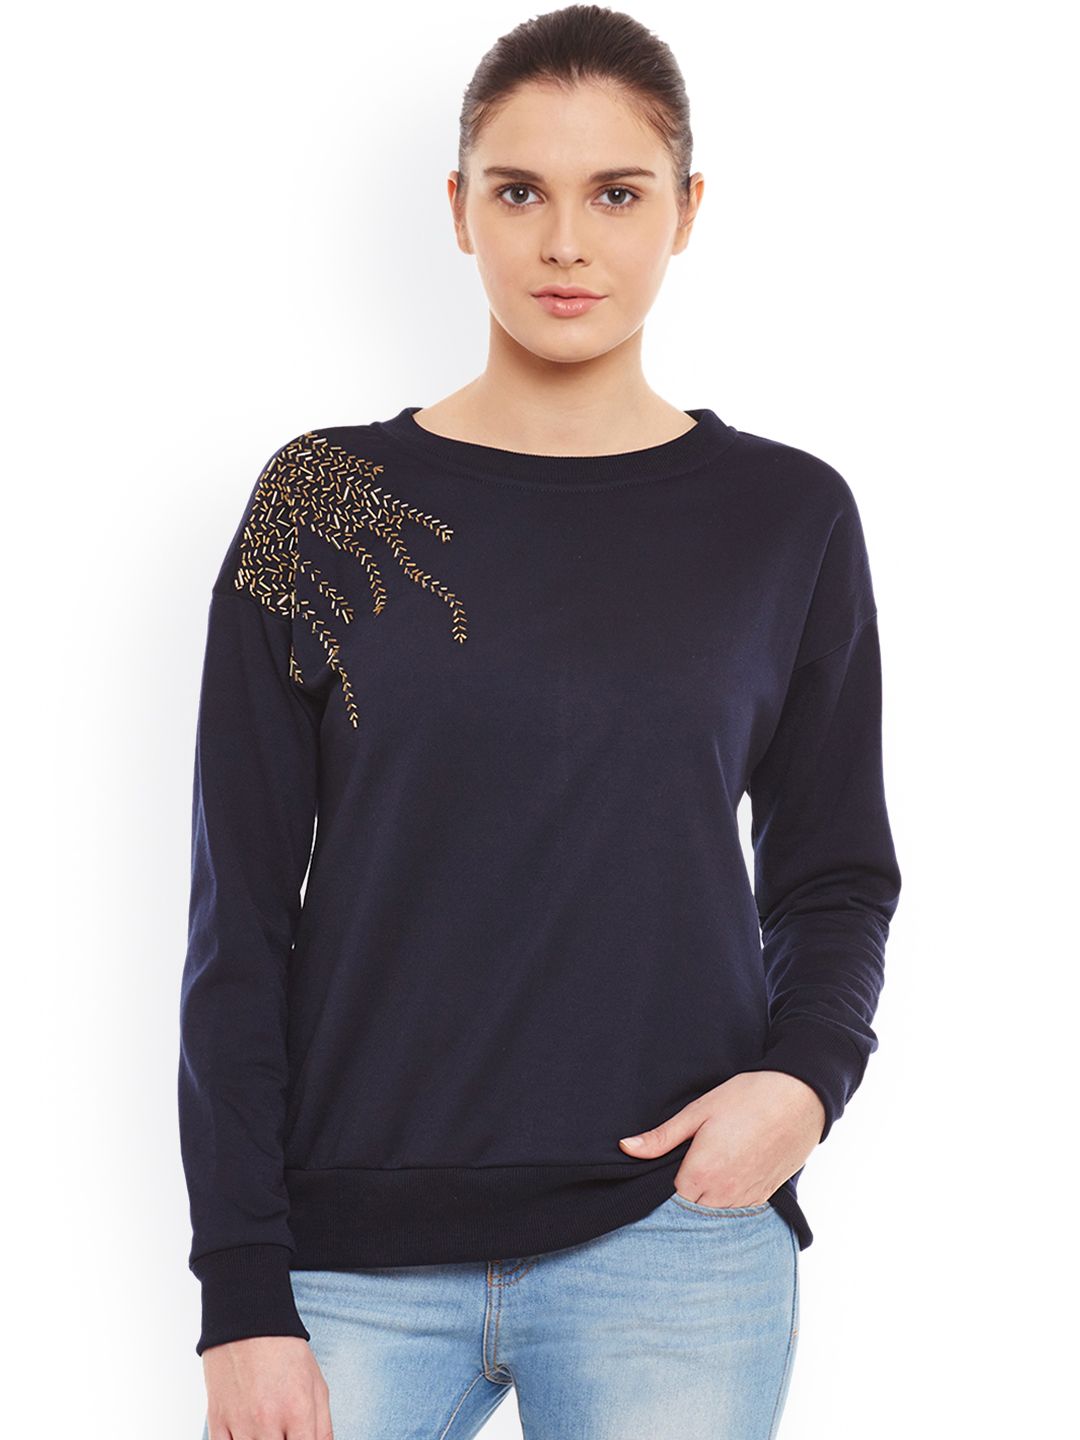 Belle Fille Navy Sweatshirt with Embellished Detail Price in India